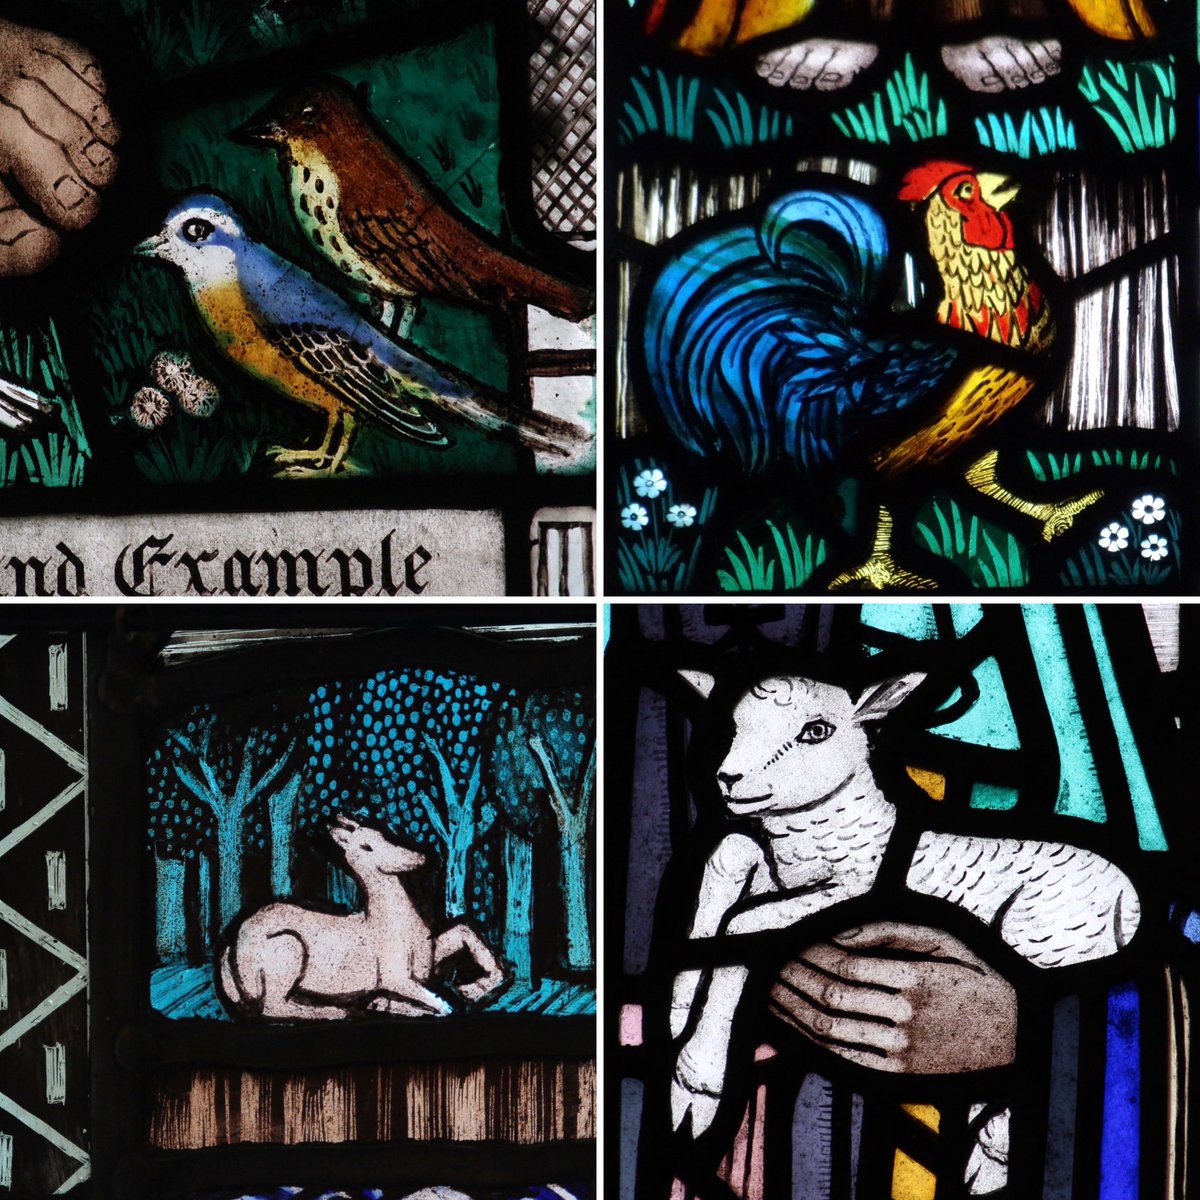 For #CheshireDay, here are some images of #StainedGlass  by #TrenaCox of #Chester - whose beautiful work can be found at locations across #Cheshire. @BSMGP